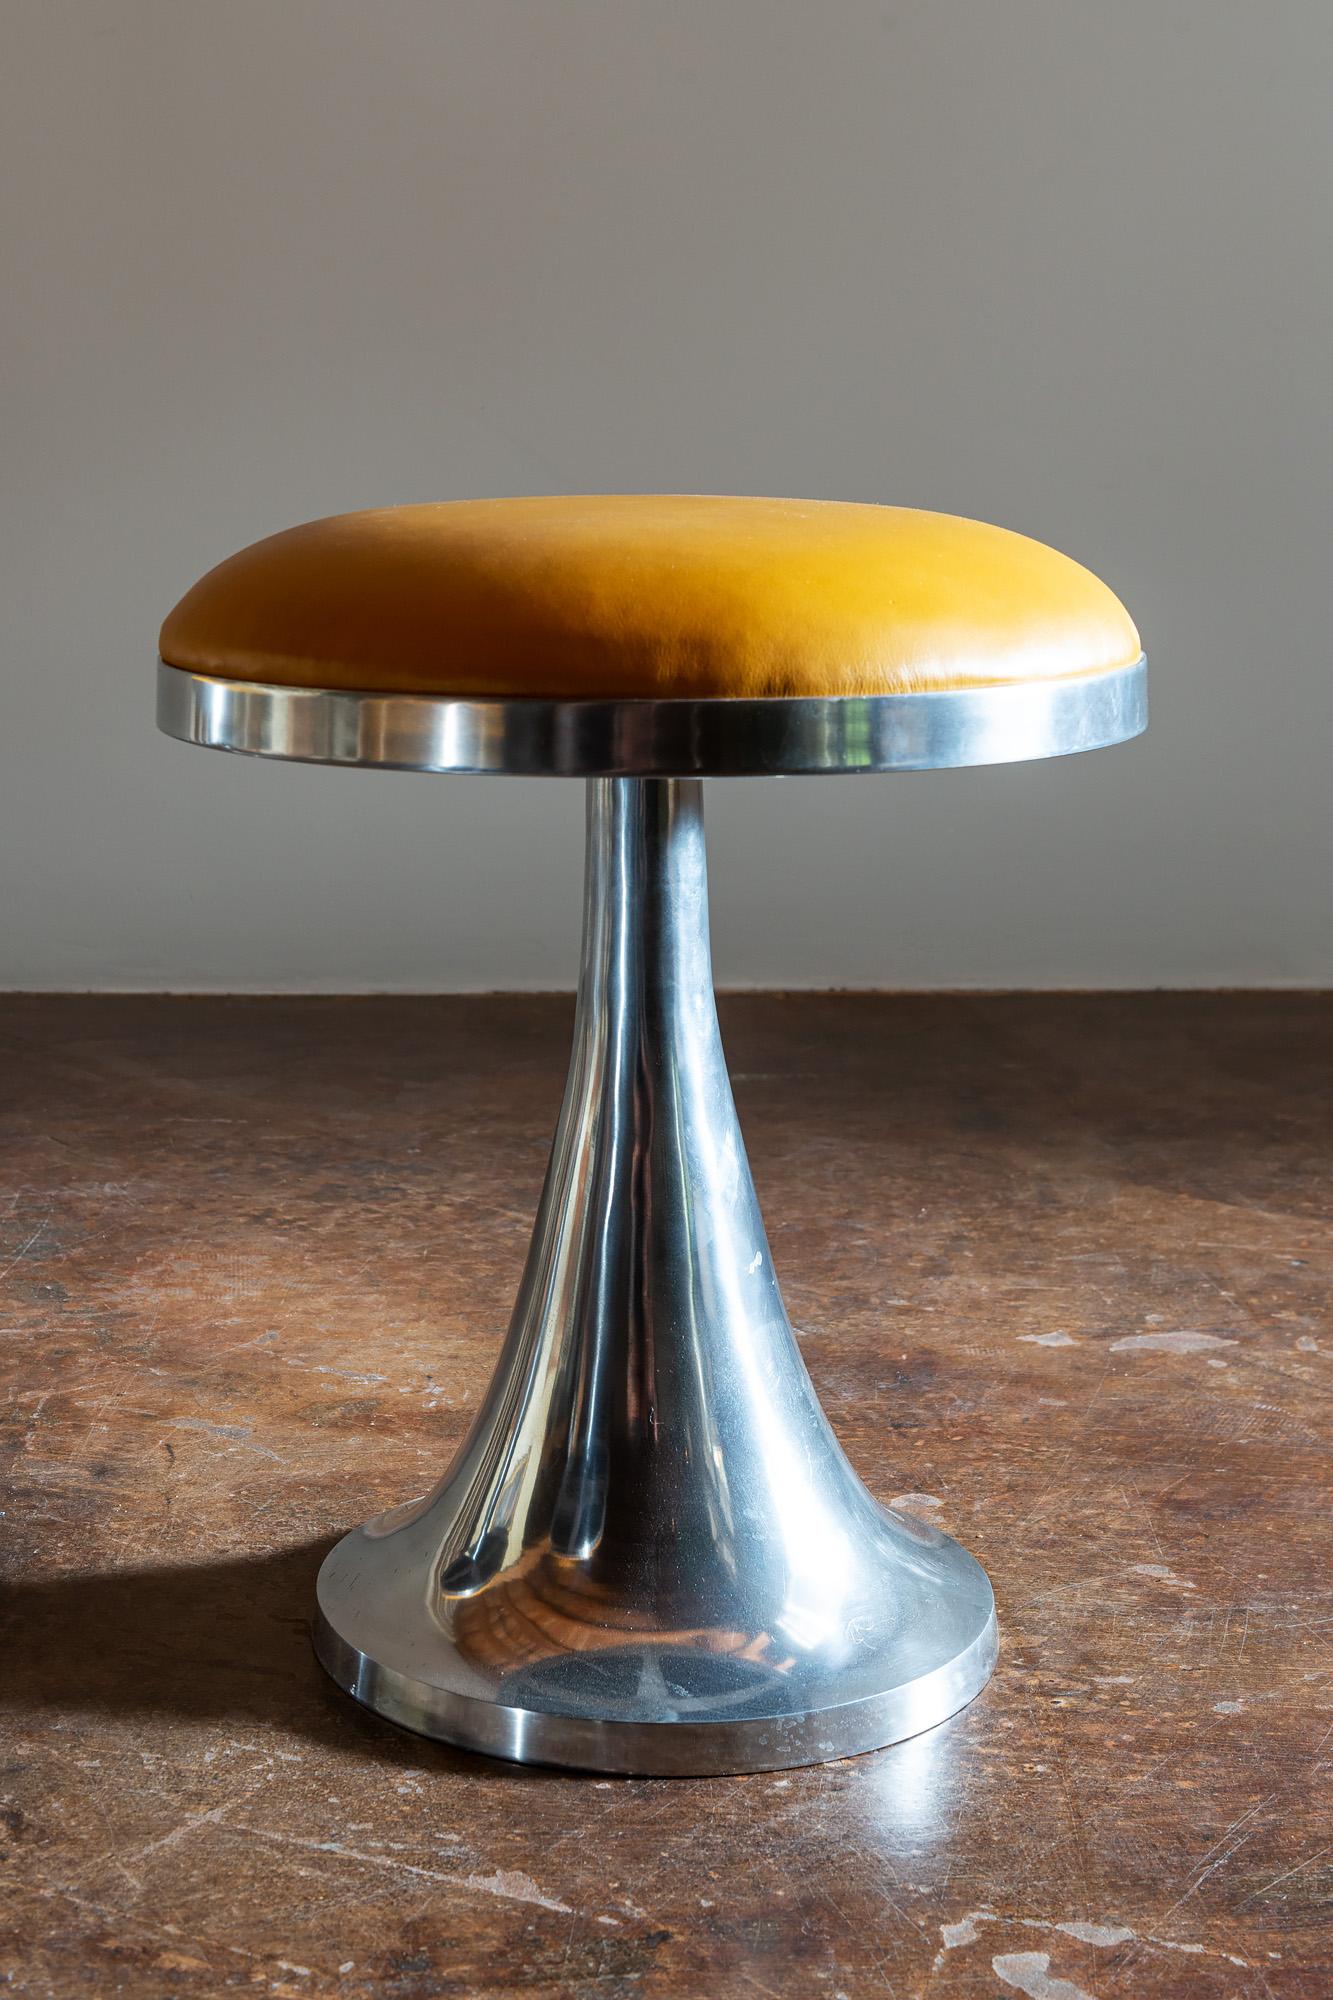 Pair of stools in chrome with ochre leather seats, 1970s.